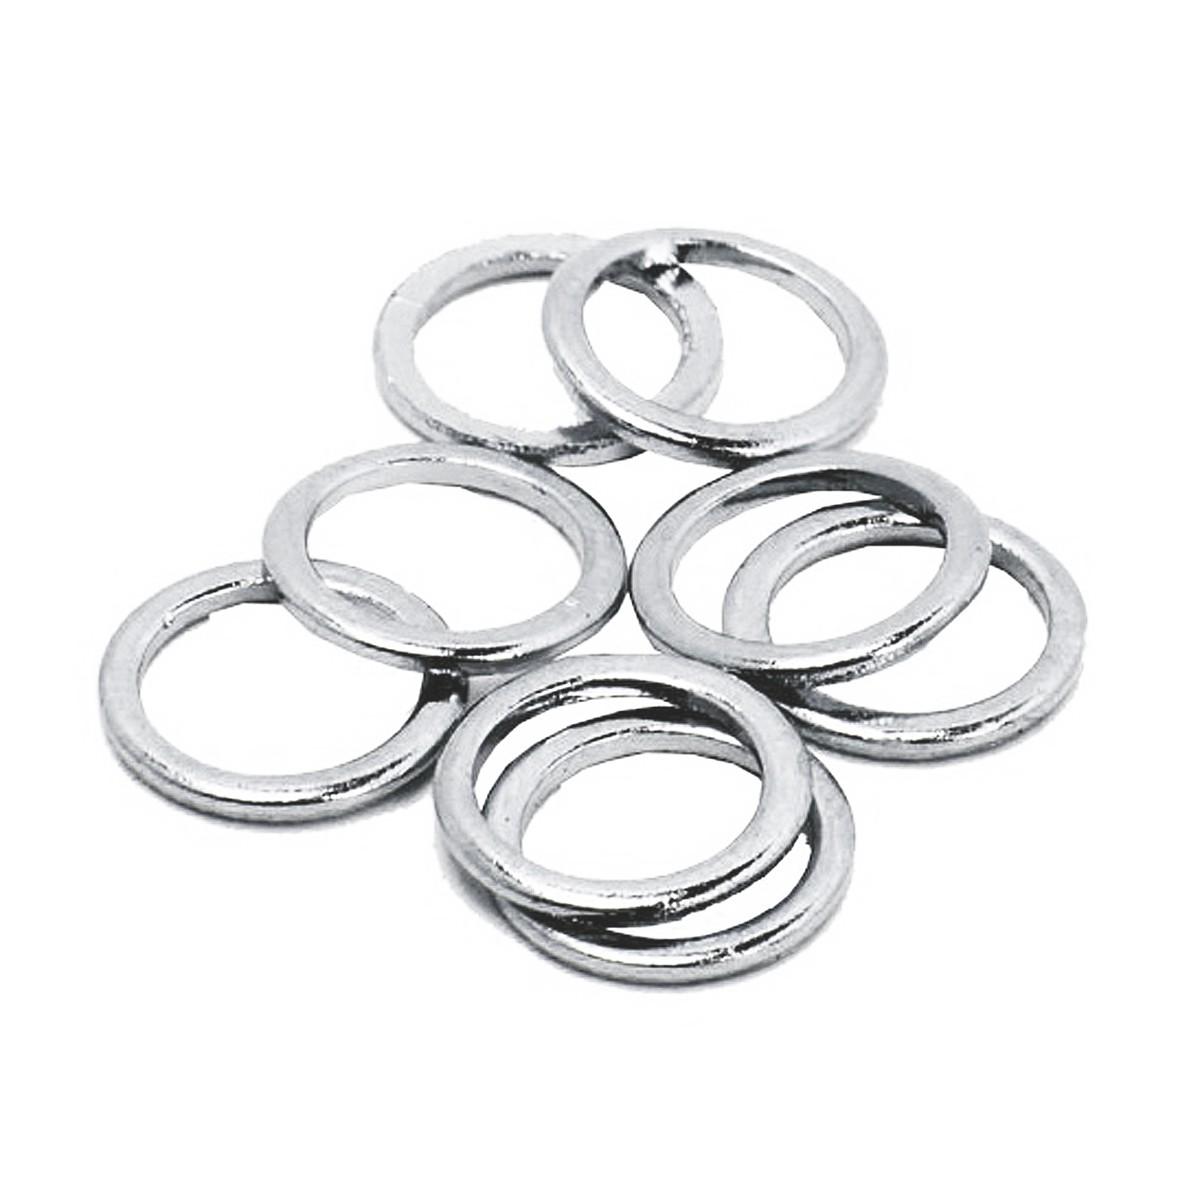 show original title Details about   Speed Rings for Skateboard and Longboard Speed Washer Set-spacer 